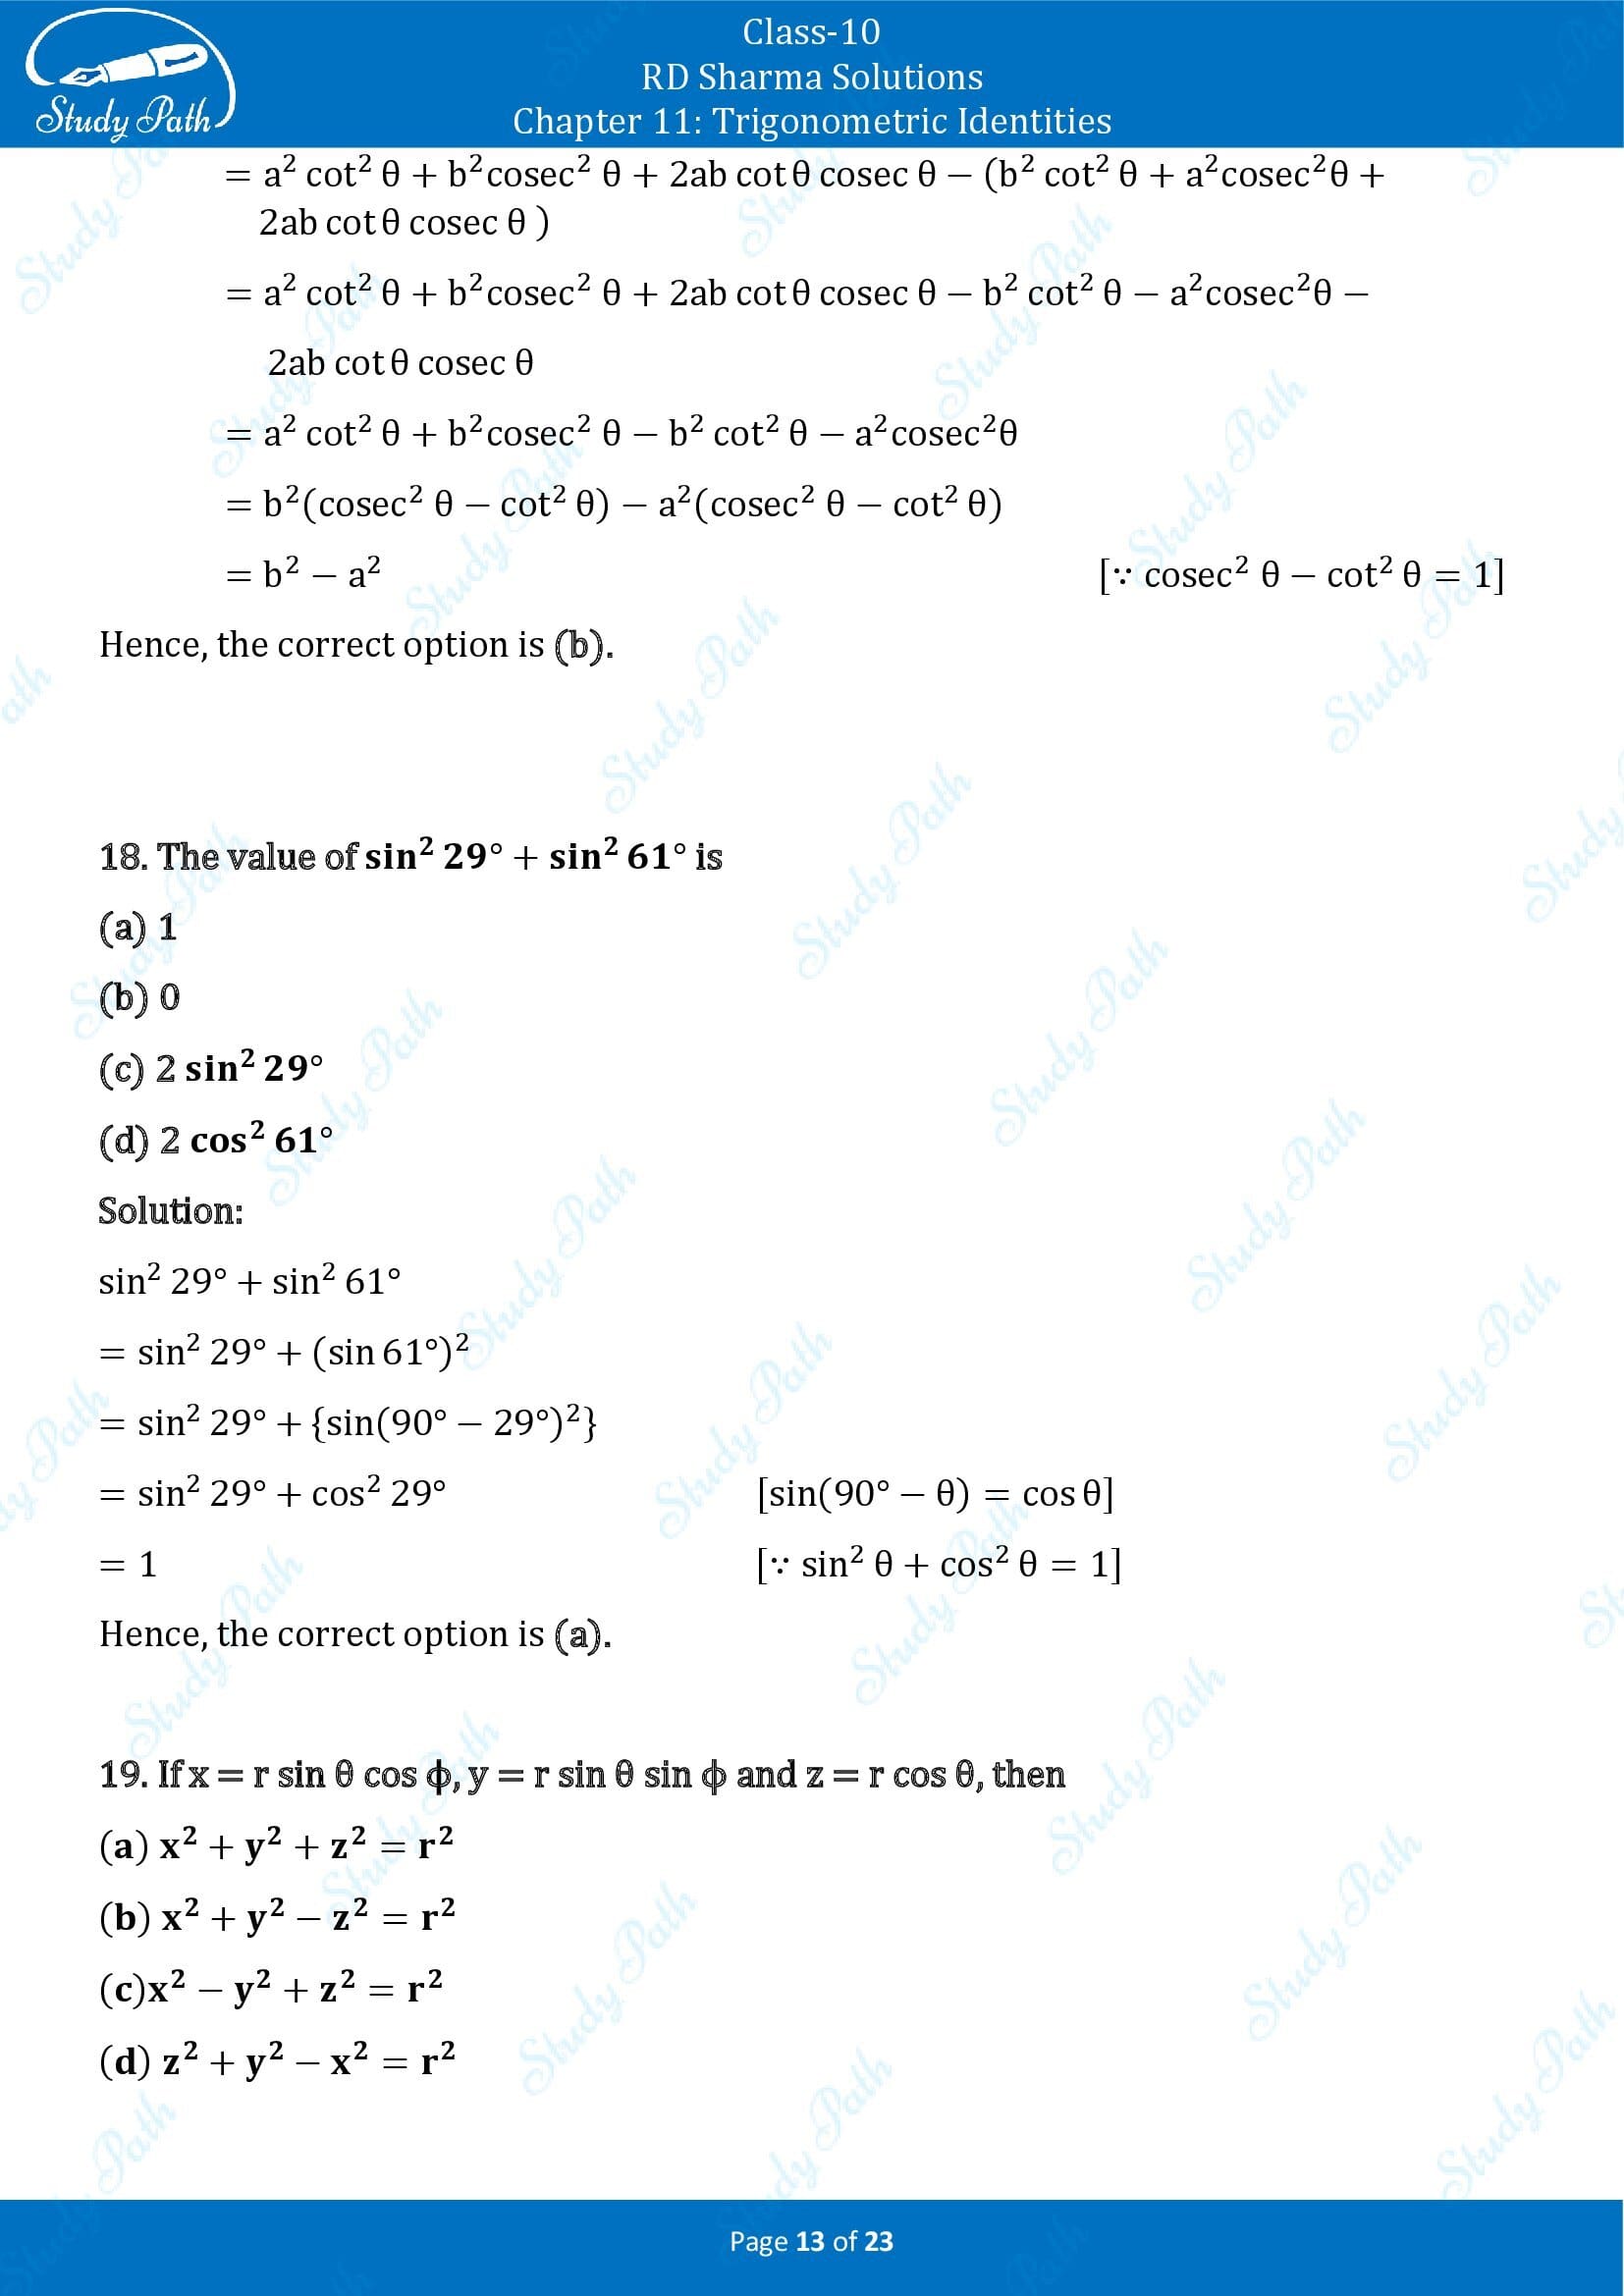 RD Sharma Solutions Class 10 Chapter 11 Trigonometric Identities Multiple Choice Questions MCQs 00013